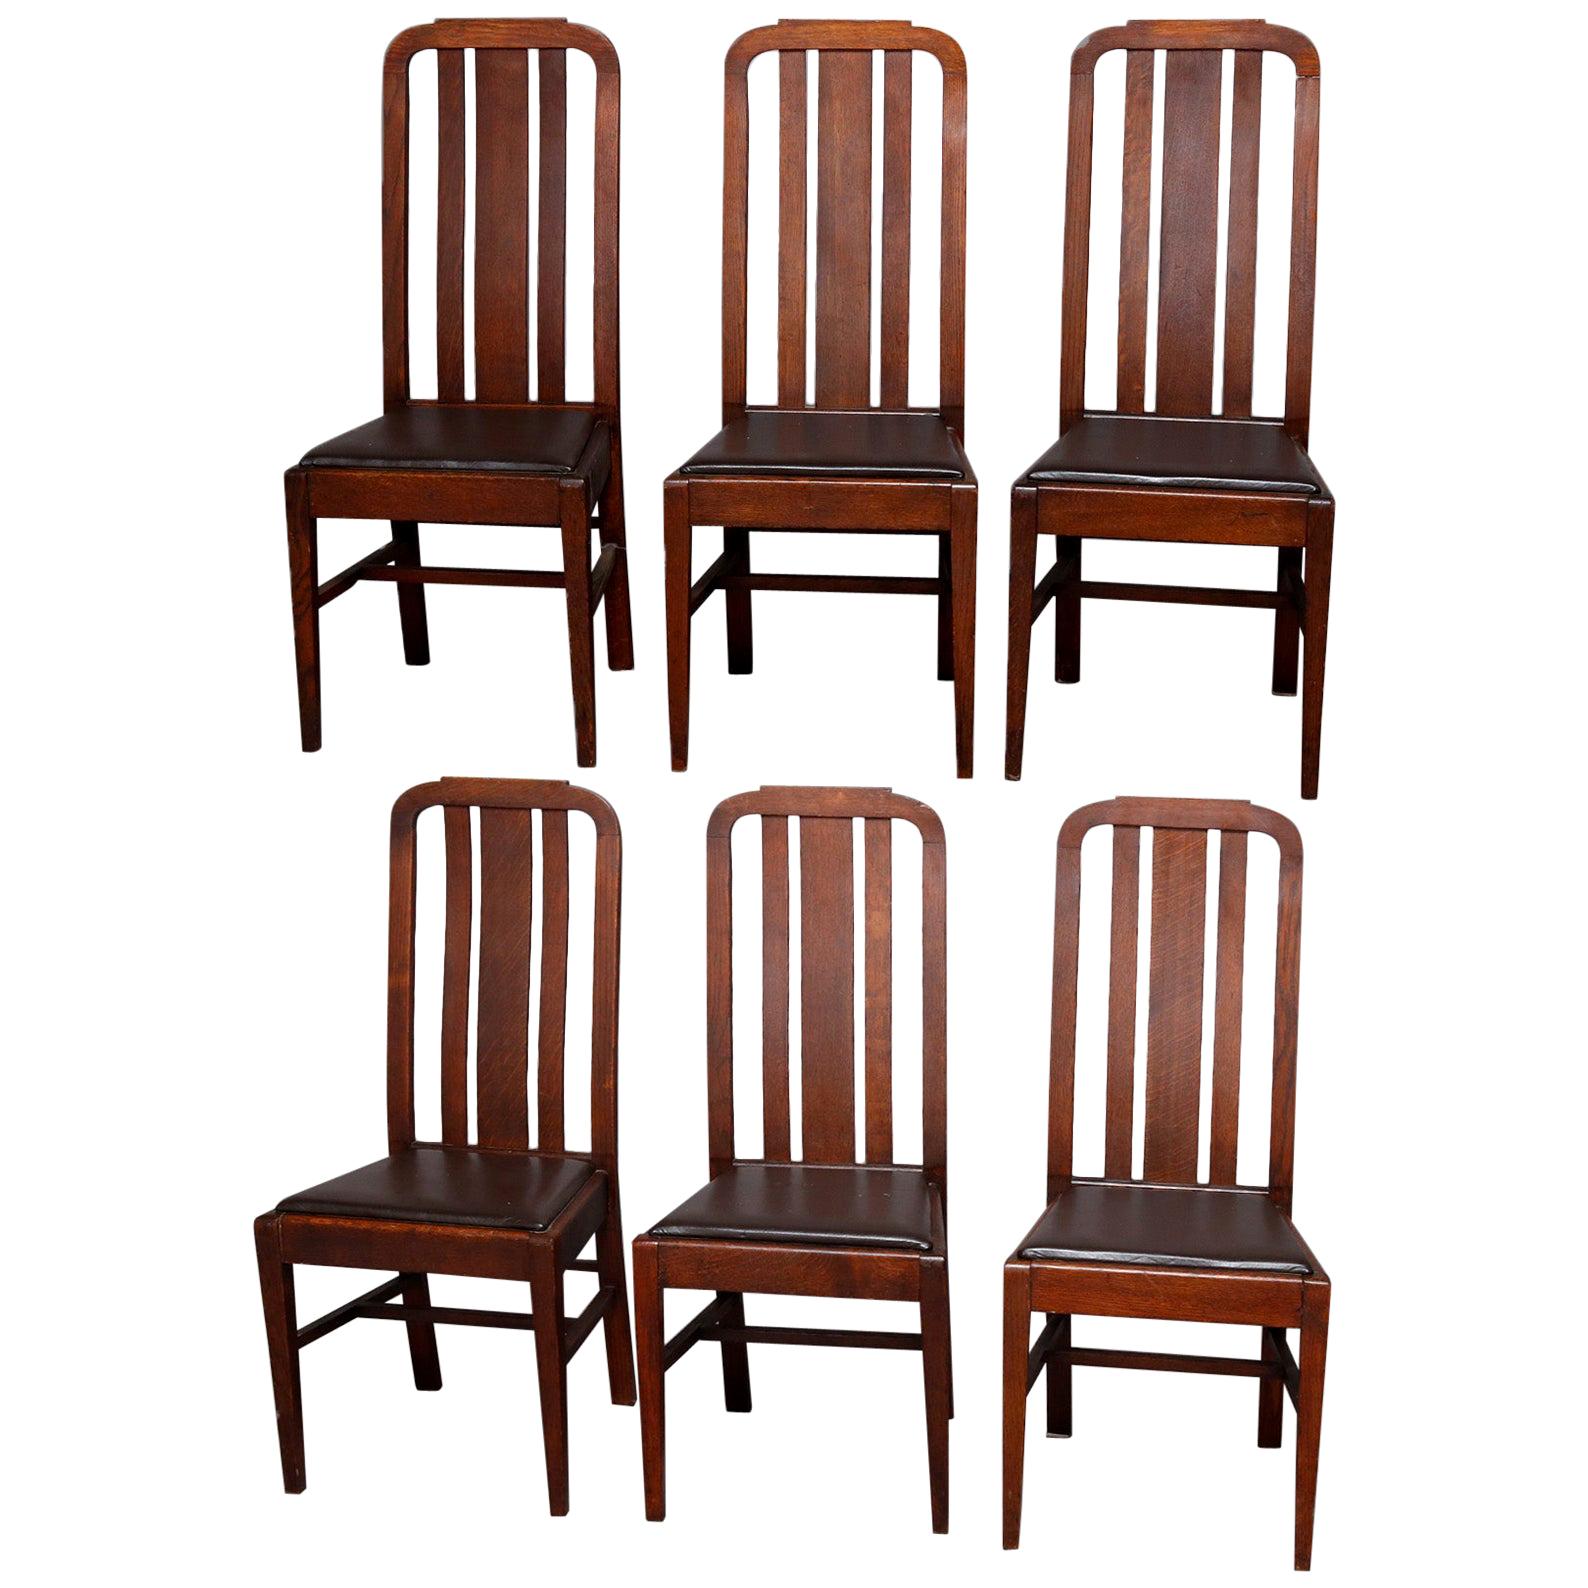 Set of 6 Arts & Crafts Mission Oak Splat Back Tall Dining Room Chairs, NY